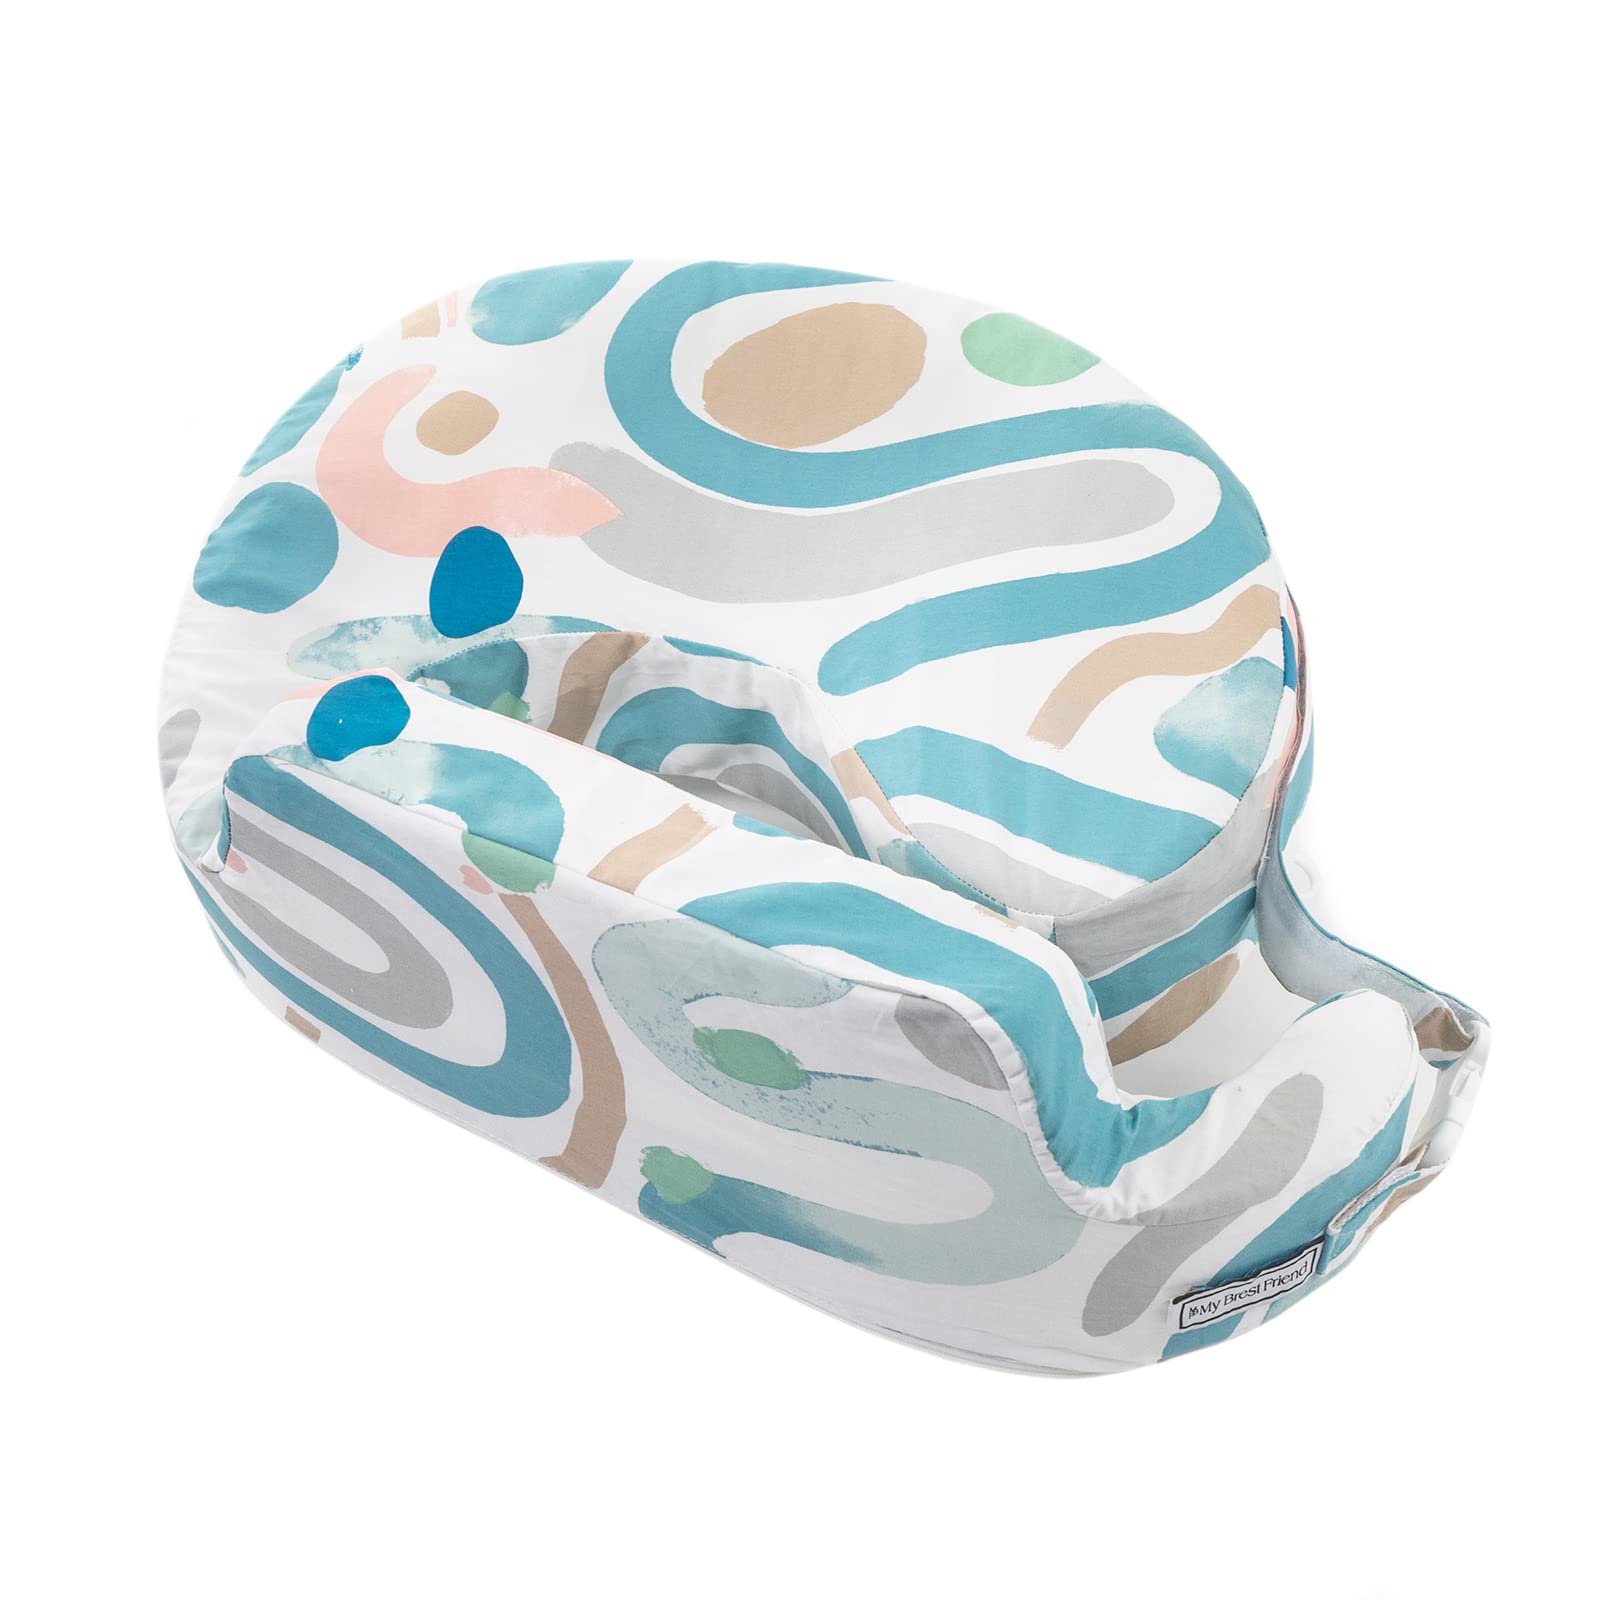 My Brest Friend Super Deluxe Nursing Pillow for Breastfeeding and Bottlefeeding with Lumbar Support, Convenient Pocket and Removable Slipcover, Modern Art Organic